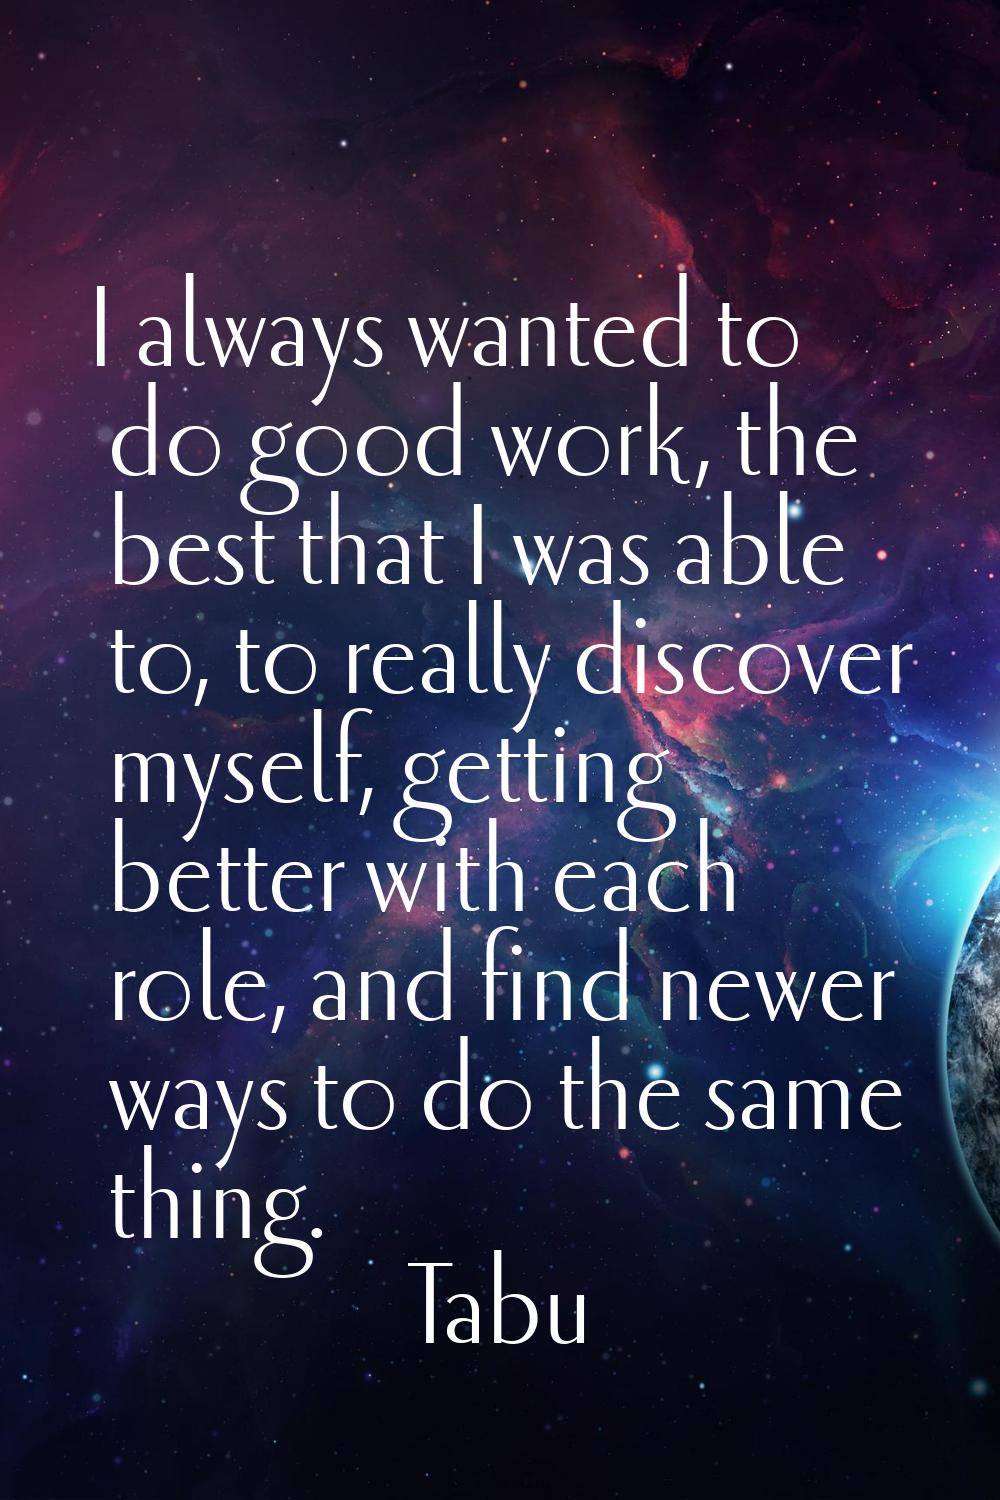 I always wanted to do good work, the best that I was able to, to really discover myself, getting be